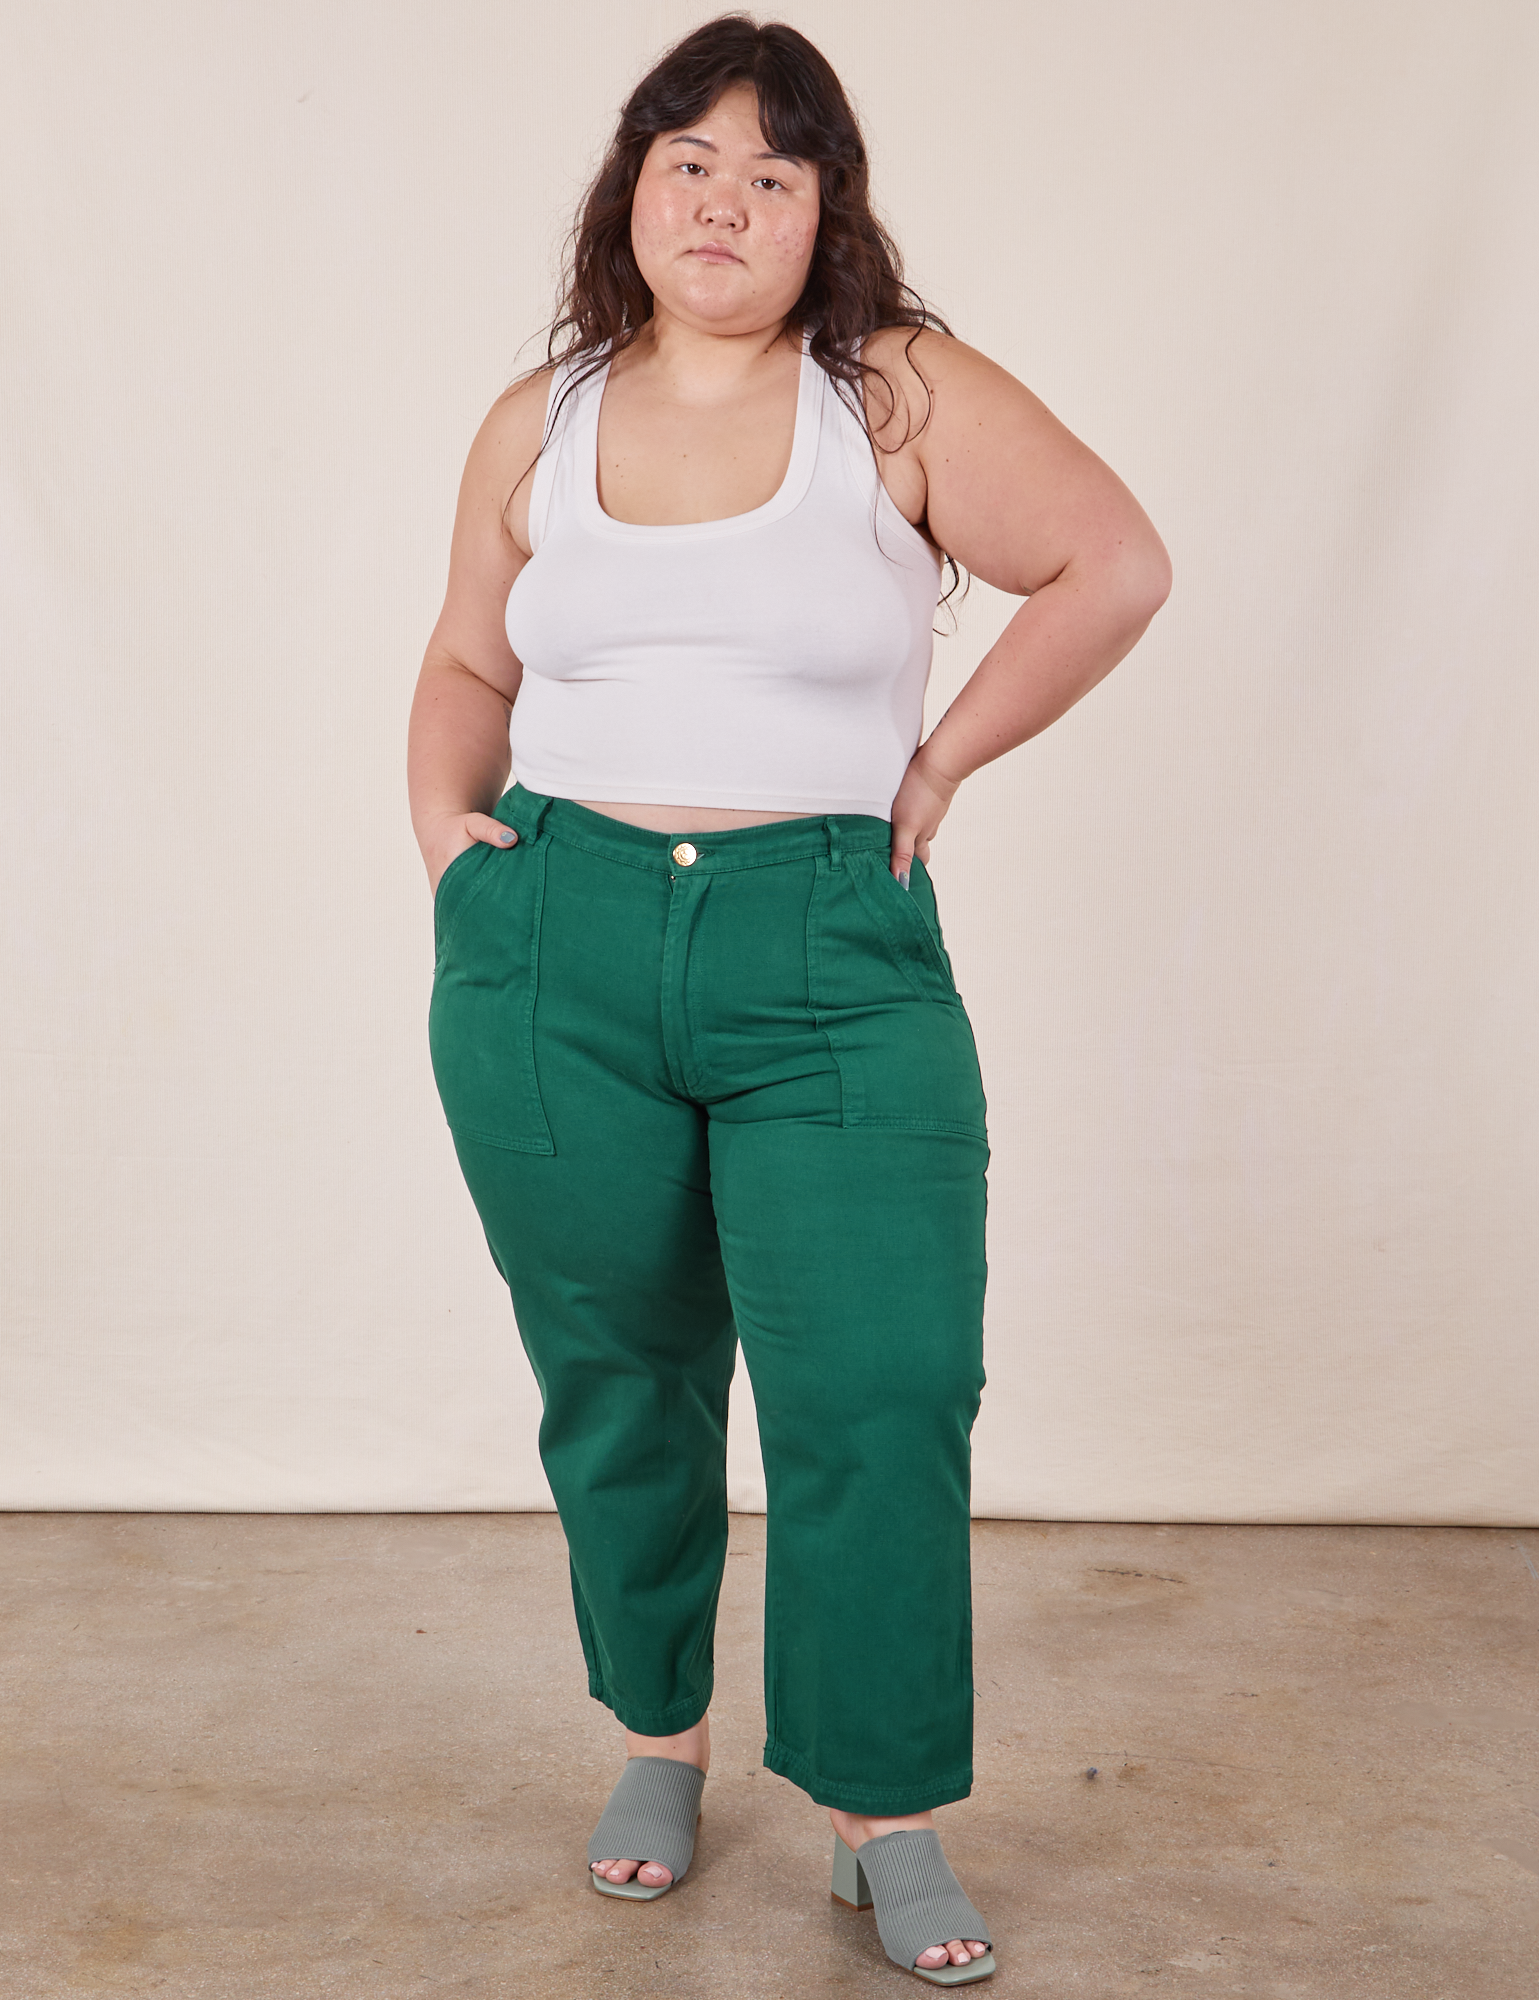 Ashley is 5&#39;7&quot; and wearing 1XL Petite Work Pants in Hunter Green paired with vintage off-white Cropped Tank Top